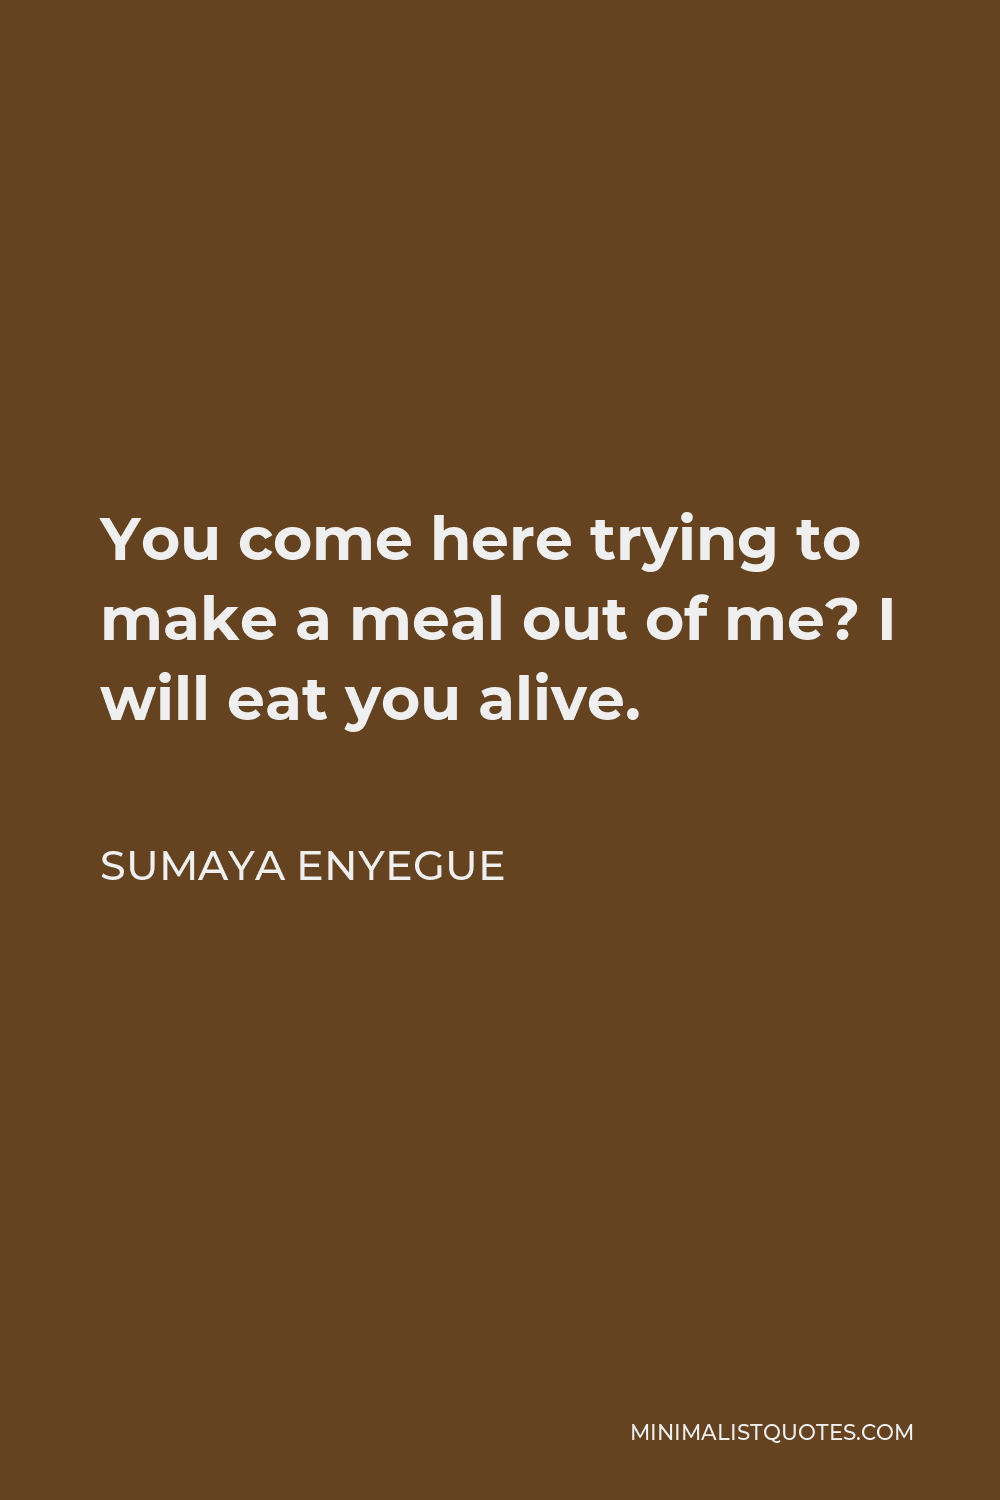 Sumaya Enyegue Quote - You come here trying to make a meal out of me? I will eat you alive.